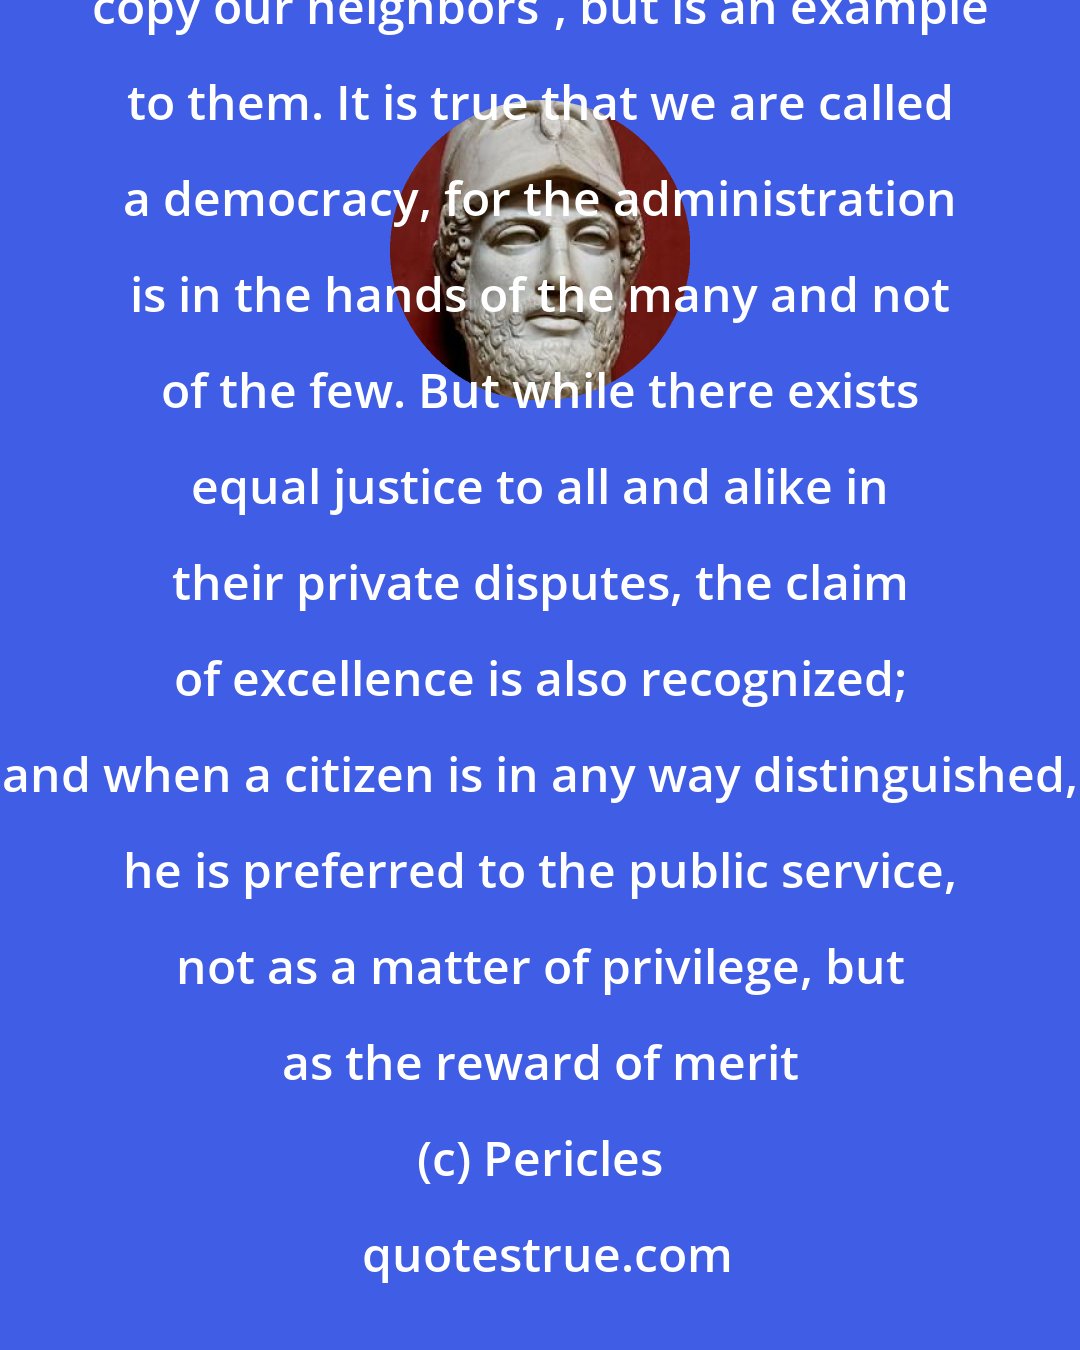 Pericles: Our form of government does not enter into rivalry with the institutions of others. Our government does not copy our neighbors', but is an example to them. It is true that we are called a democracy, for the administration is in the hands of the many and not of the few. But while there exists equal justice to all and alike in their private disputes, the claim of excellence is also recognized; and when a citizen is in any way distinguished, he is preferred to the public service, not as a matter of privilege, but as the reward of merit